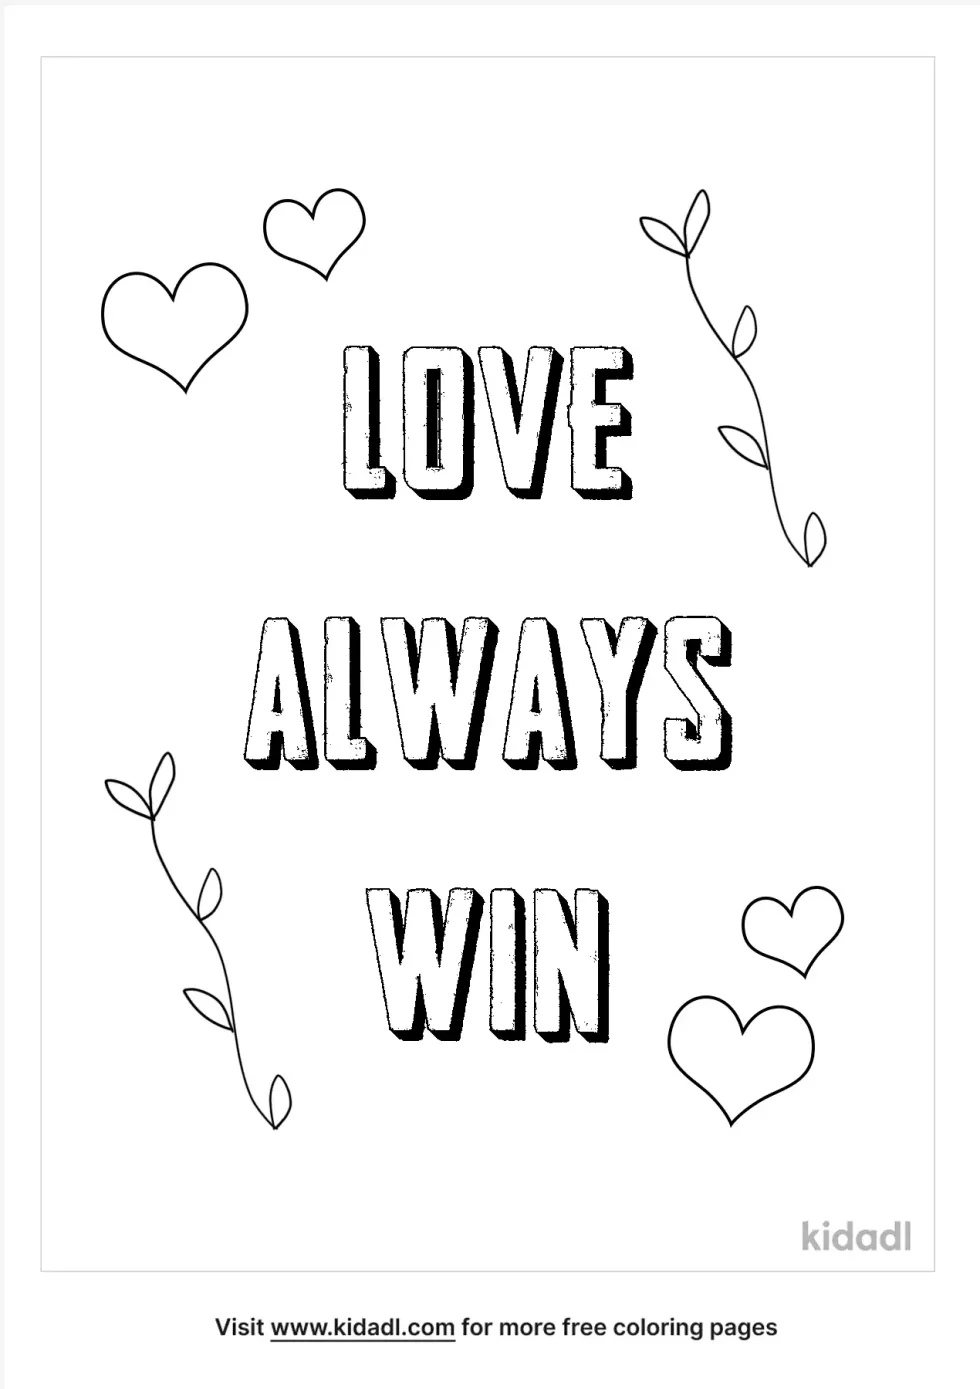 Love Always Win Coloring Page